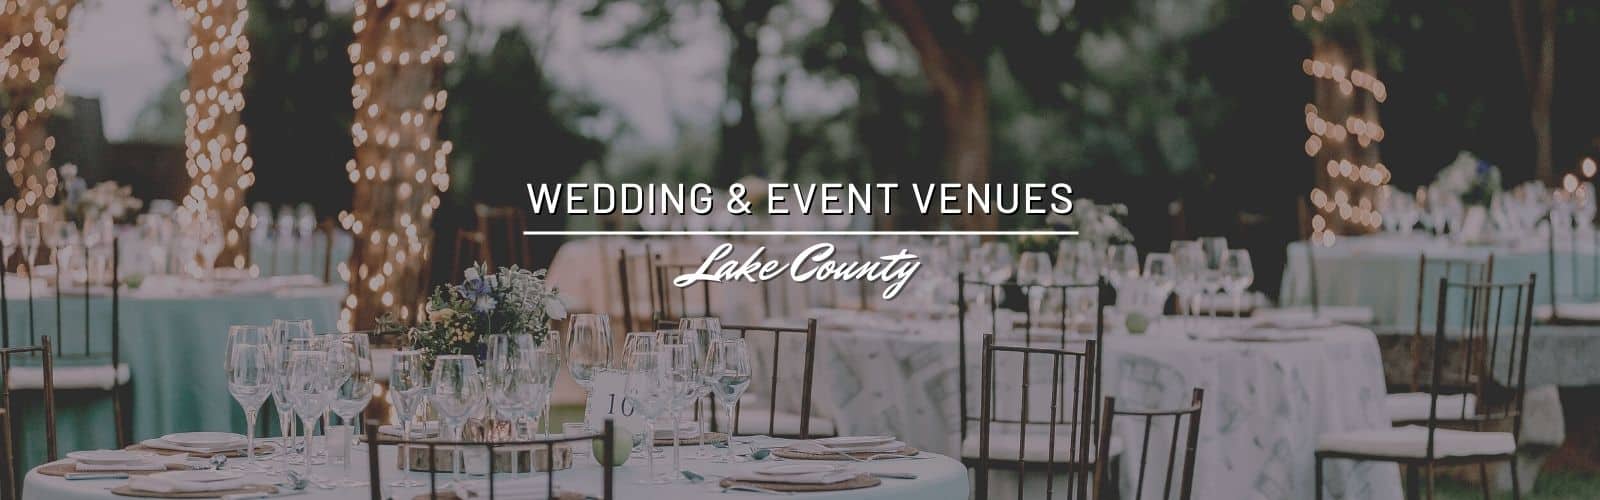 Lake County Wedding and Event Venues